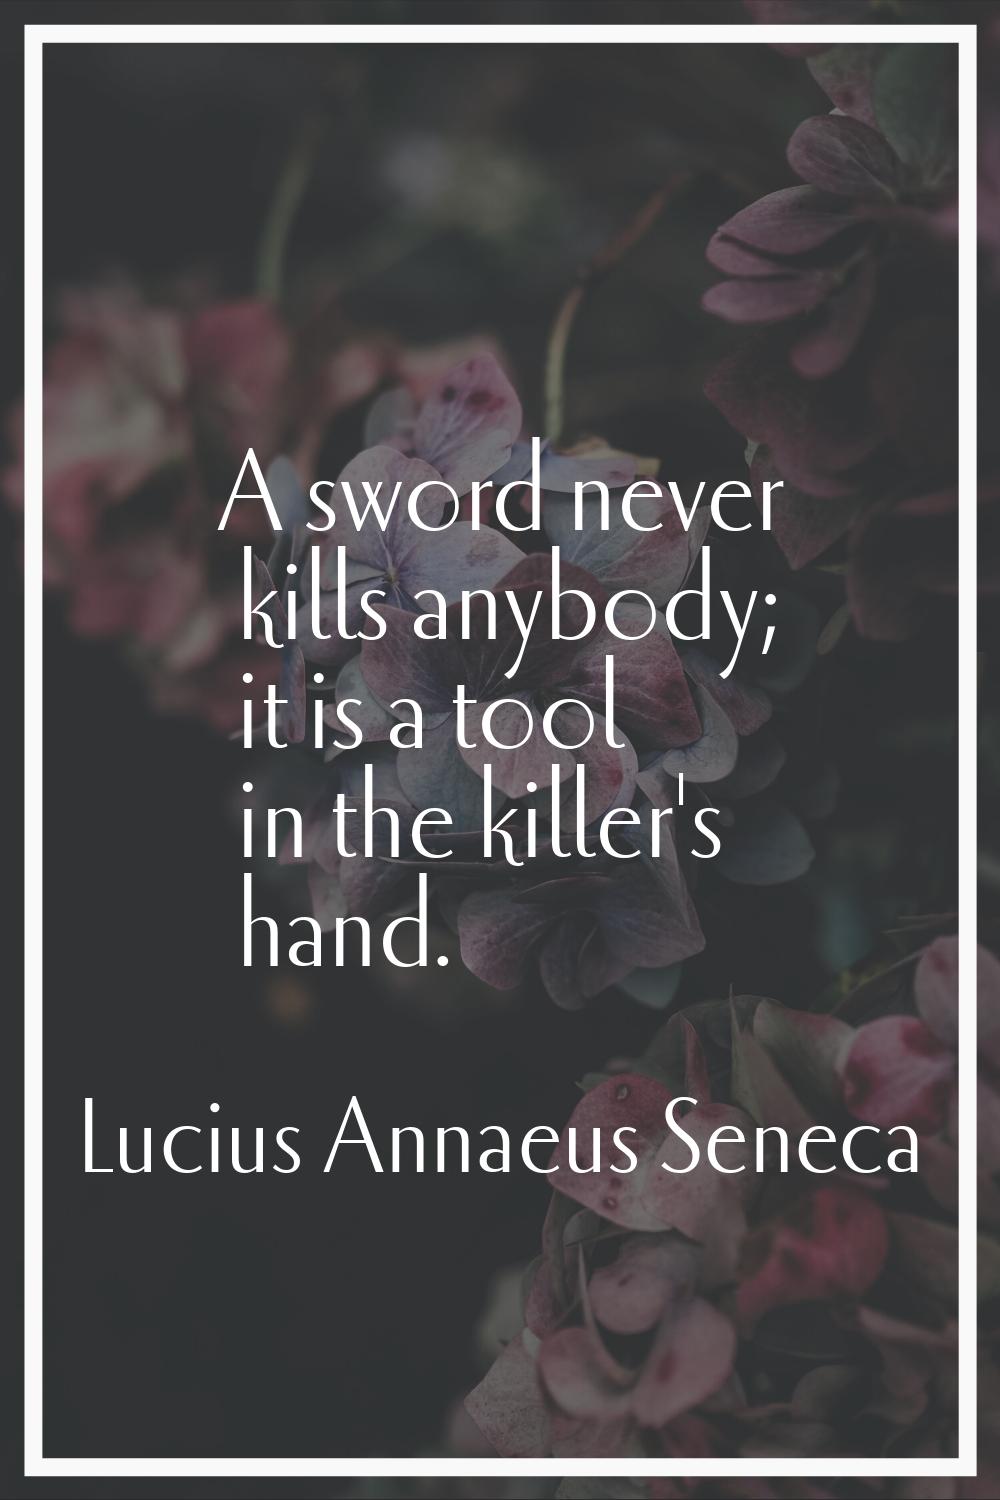 A sword never kills anybody; it is a tool in the killer's hand.